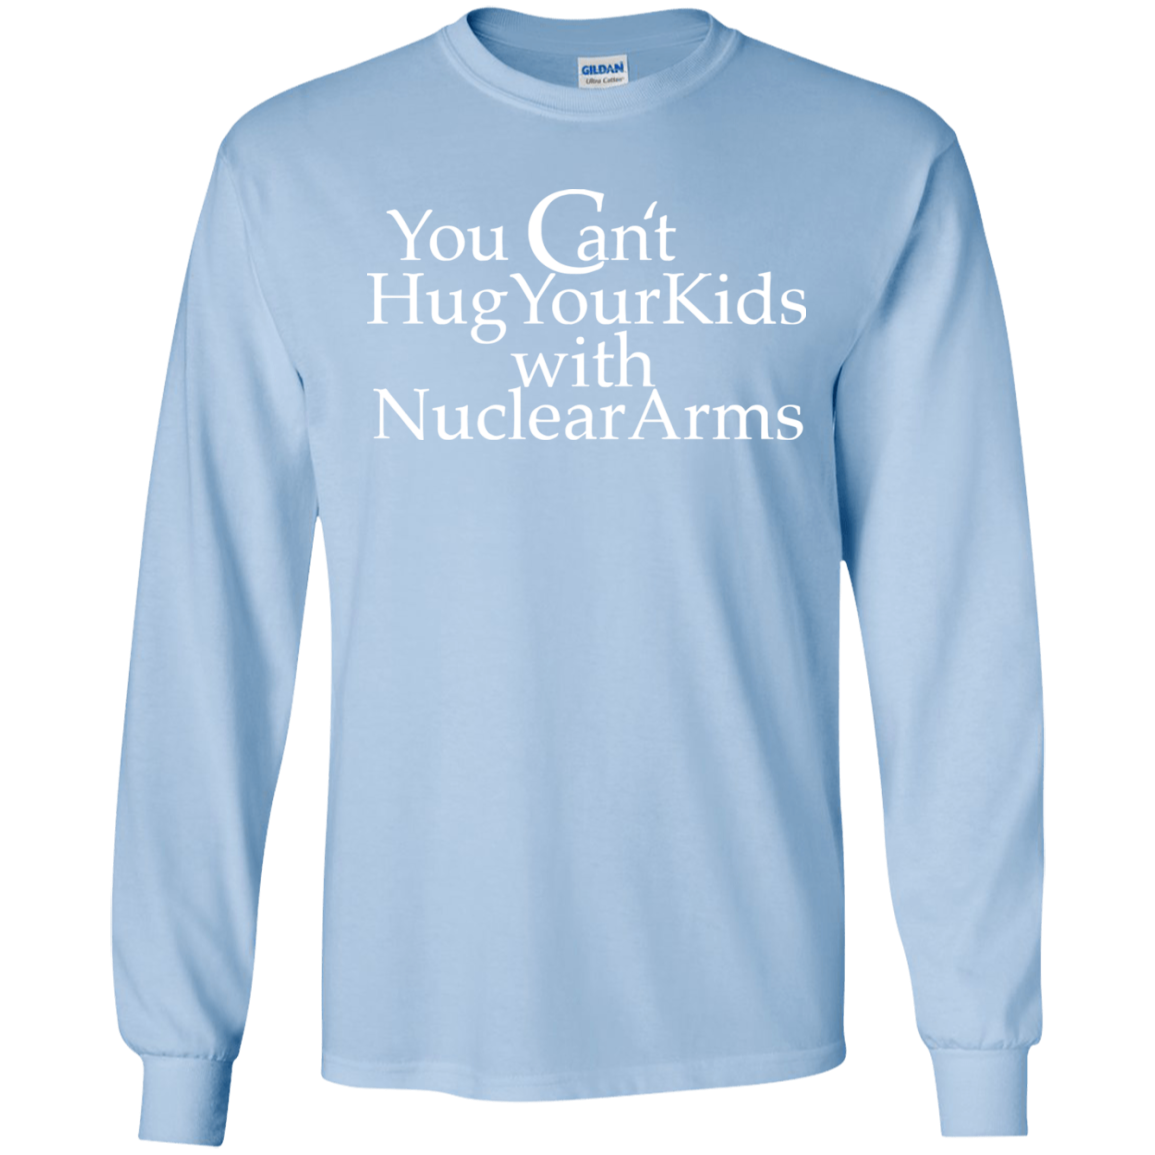 You can't hug your kids with Nuclear Arms shirt, tank, hoodie